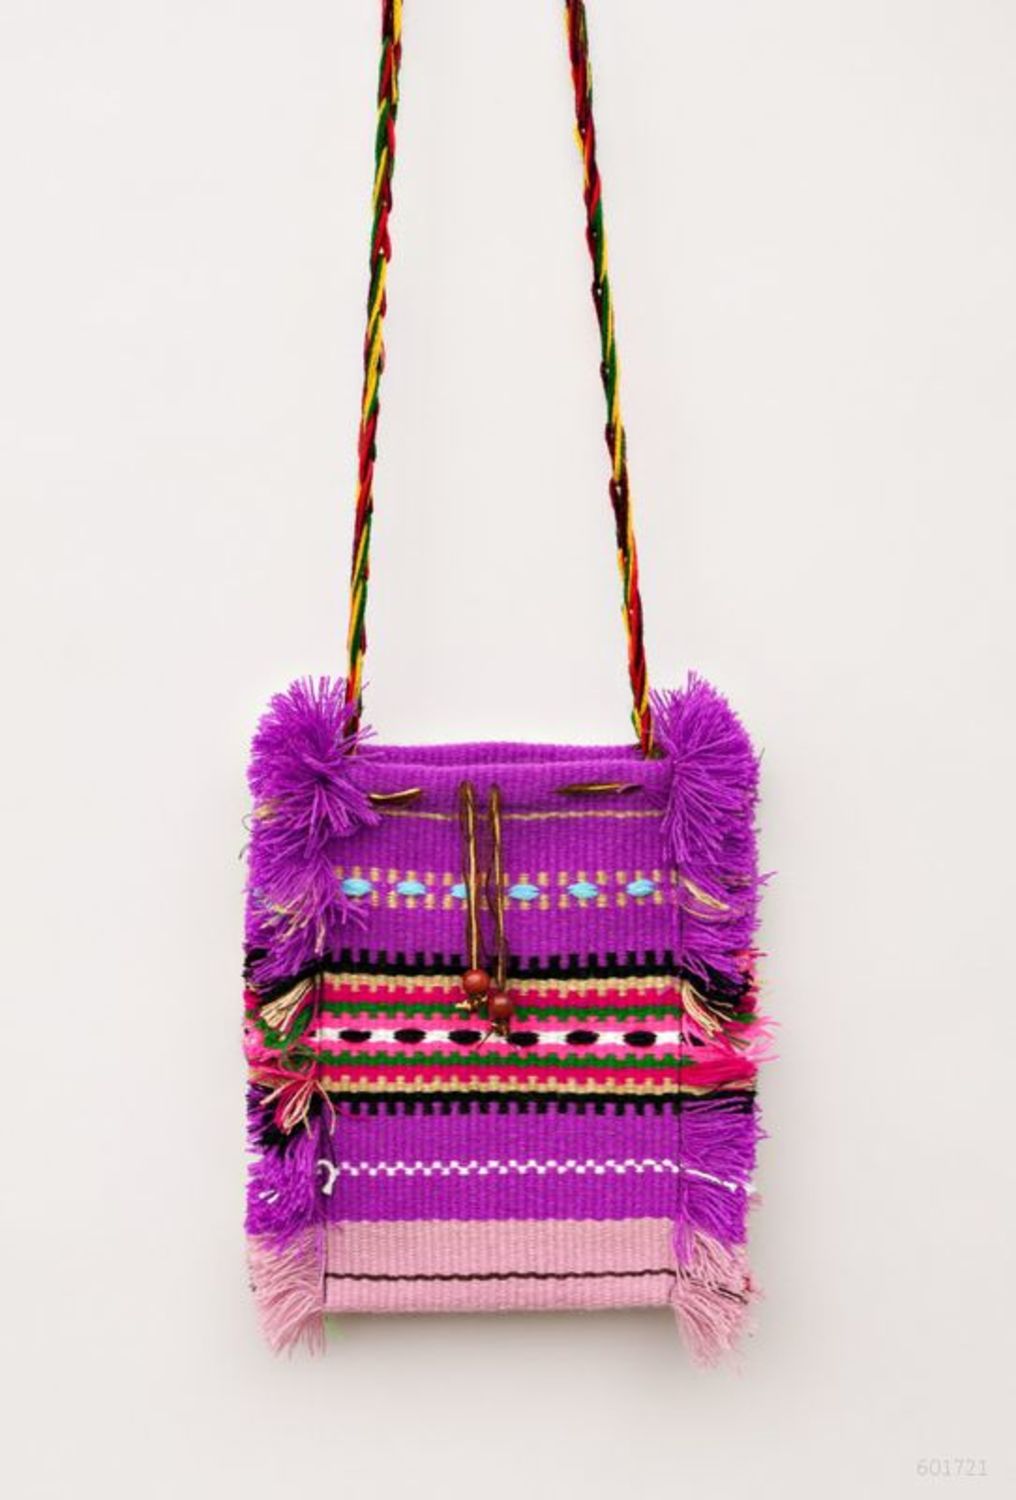 Fabric purse in ethnic style photo 3